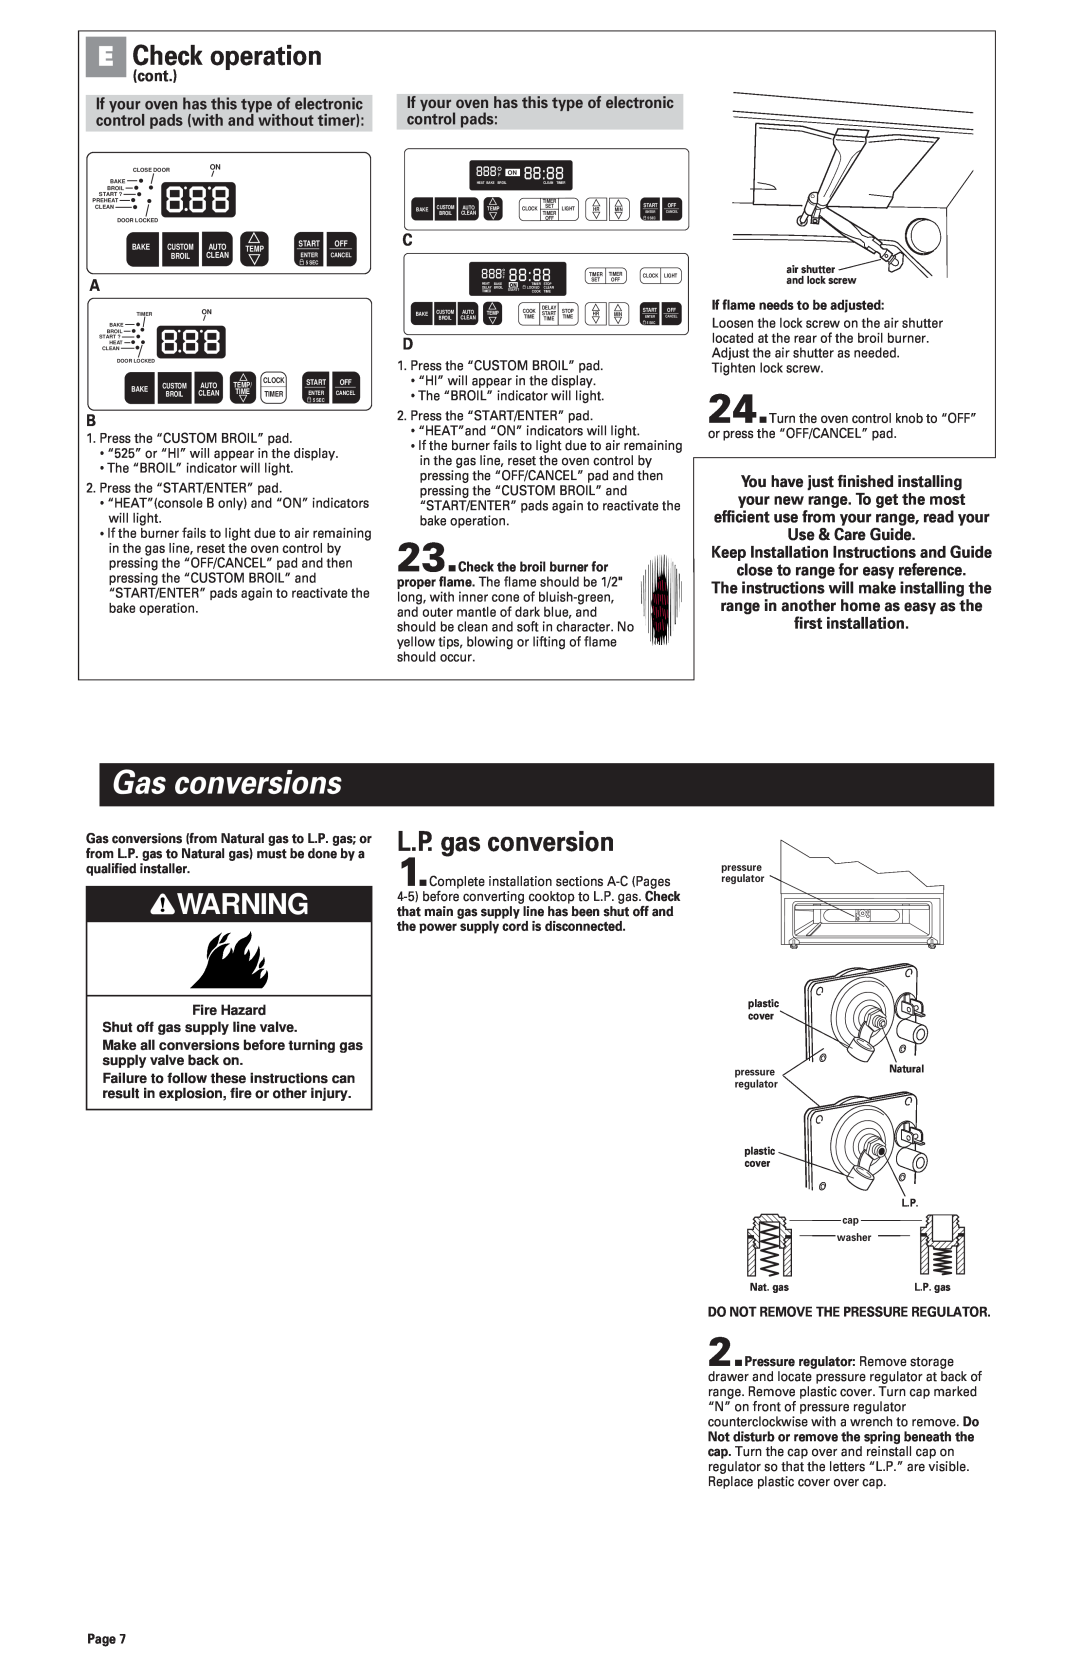 Whirlpool 8523782 Gas conversions, L.P. gas conversion, cont, Keep Installation Instructions and Guide, E Check operation 